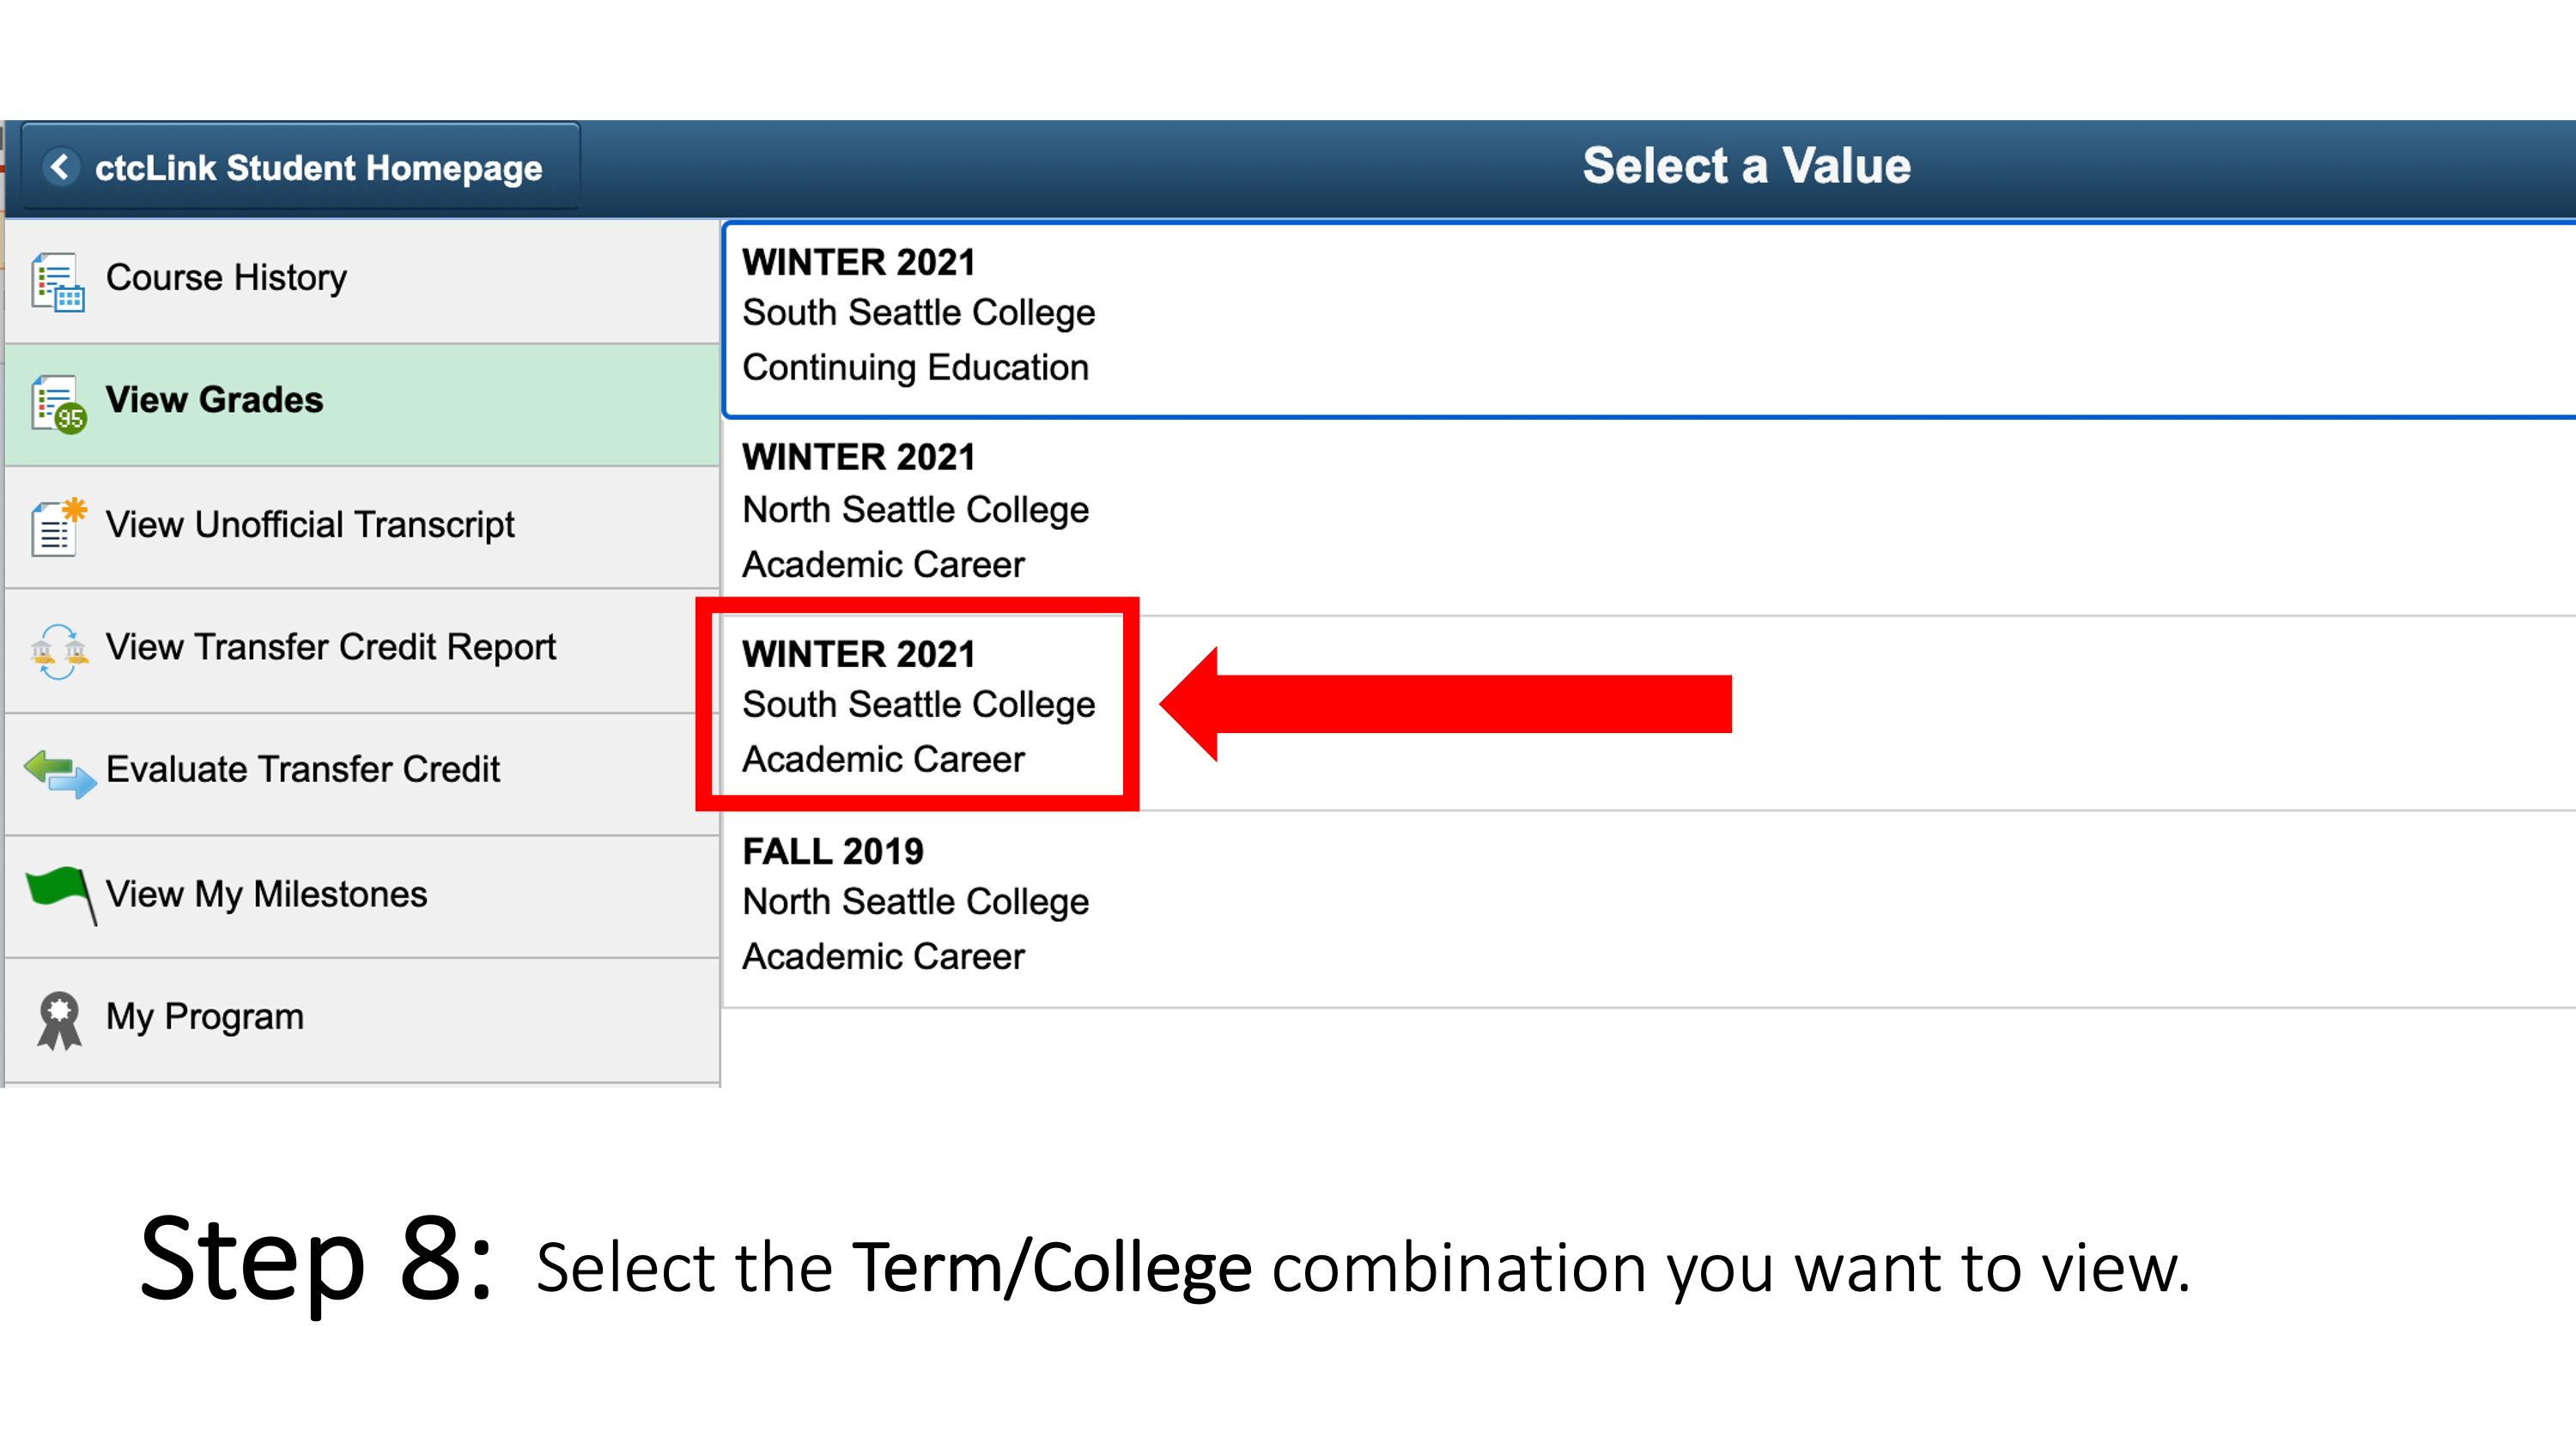 Select the Term/College combination you want to view.